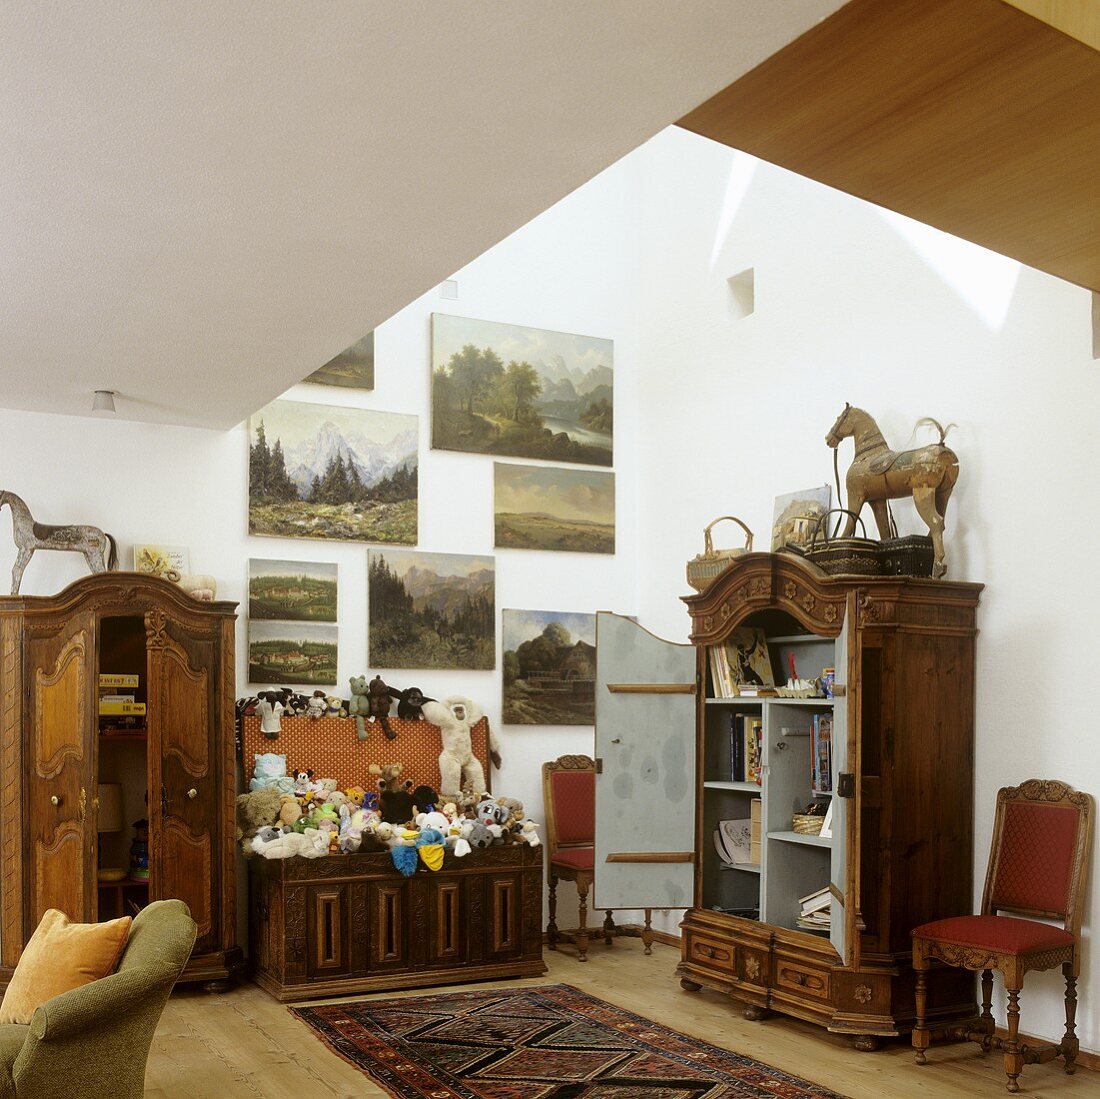 A collection of antique furniture and paintings in the attic of a house